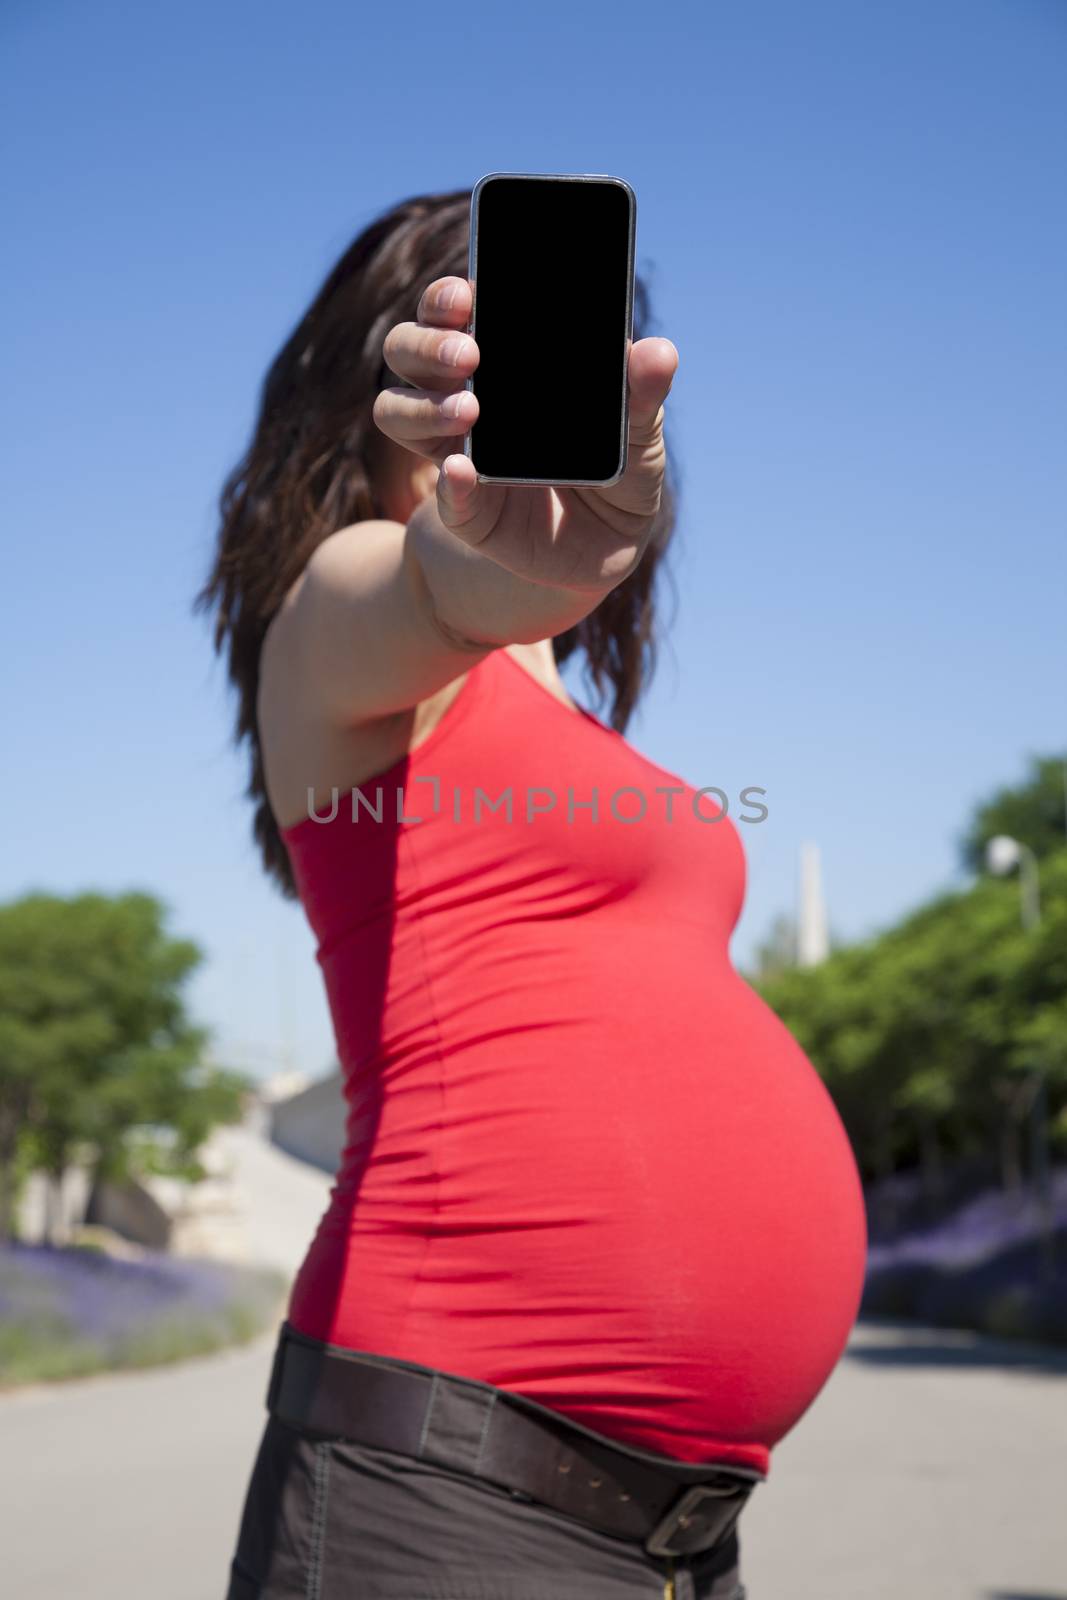 pregnant woman showing blank smartphone screen